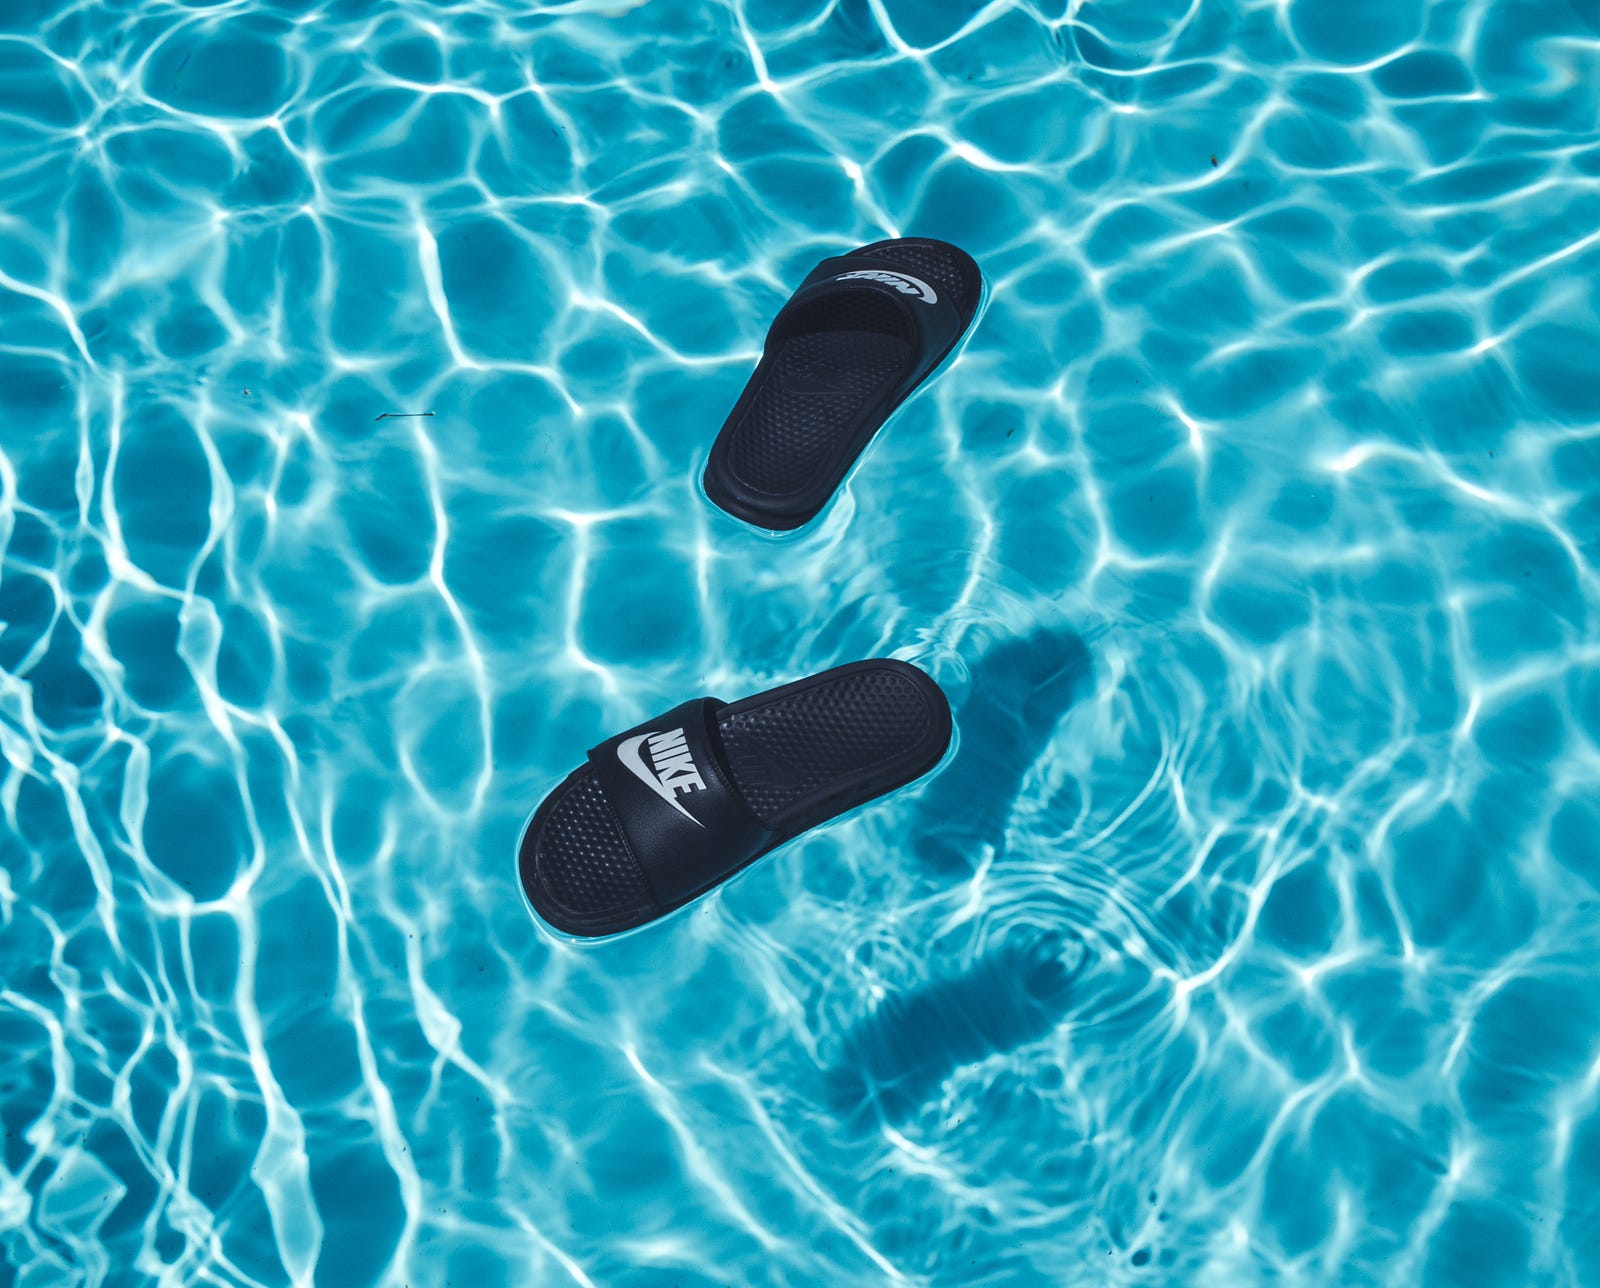 A pair of Nike sandals float in a sun-speckled swimming pool. A randomized study revealed the following results: Injury risk was greater in recreational runners who trained in the shoe version with greater cushioning stiffness (Stiff) than those using the soft version.